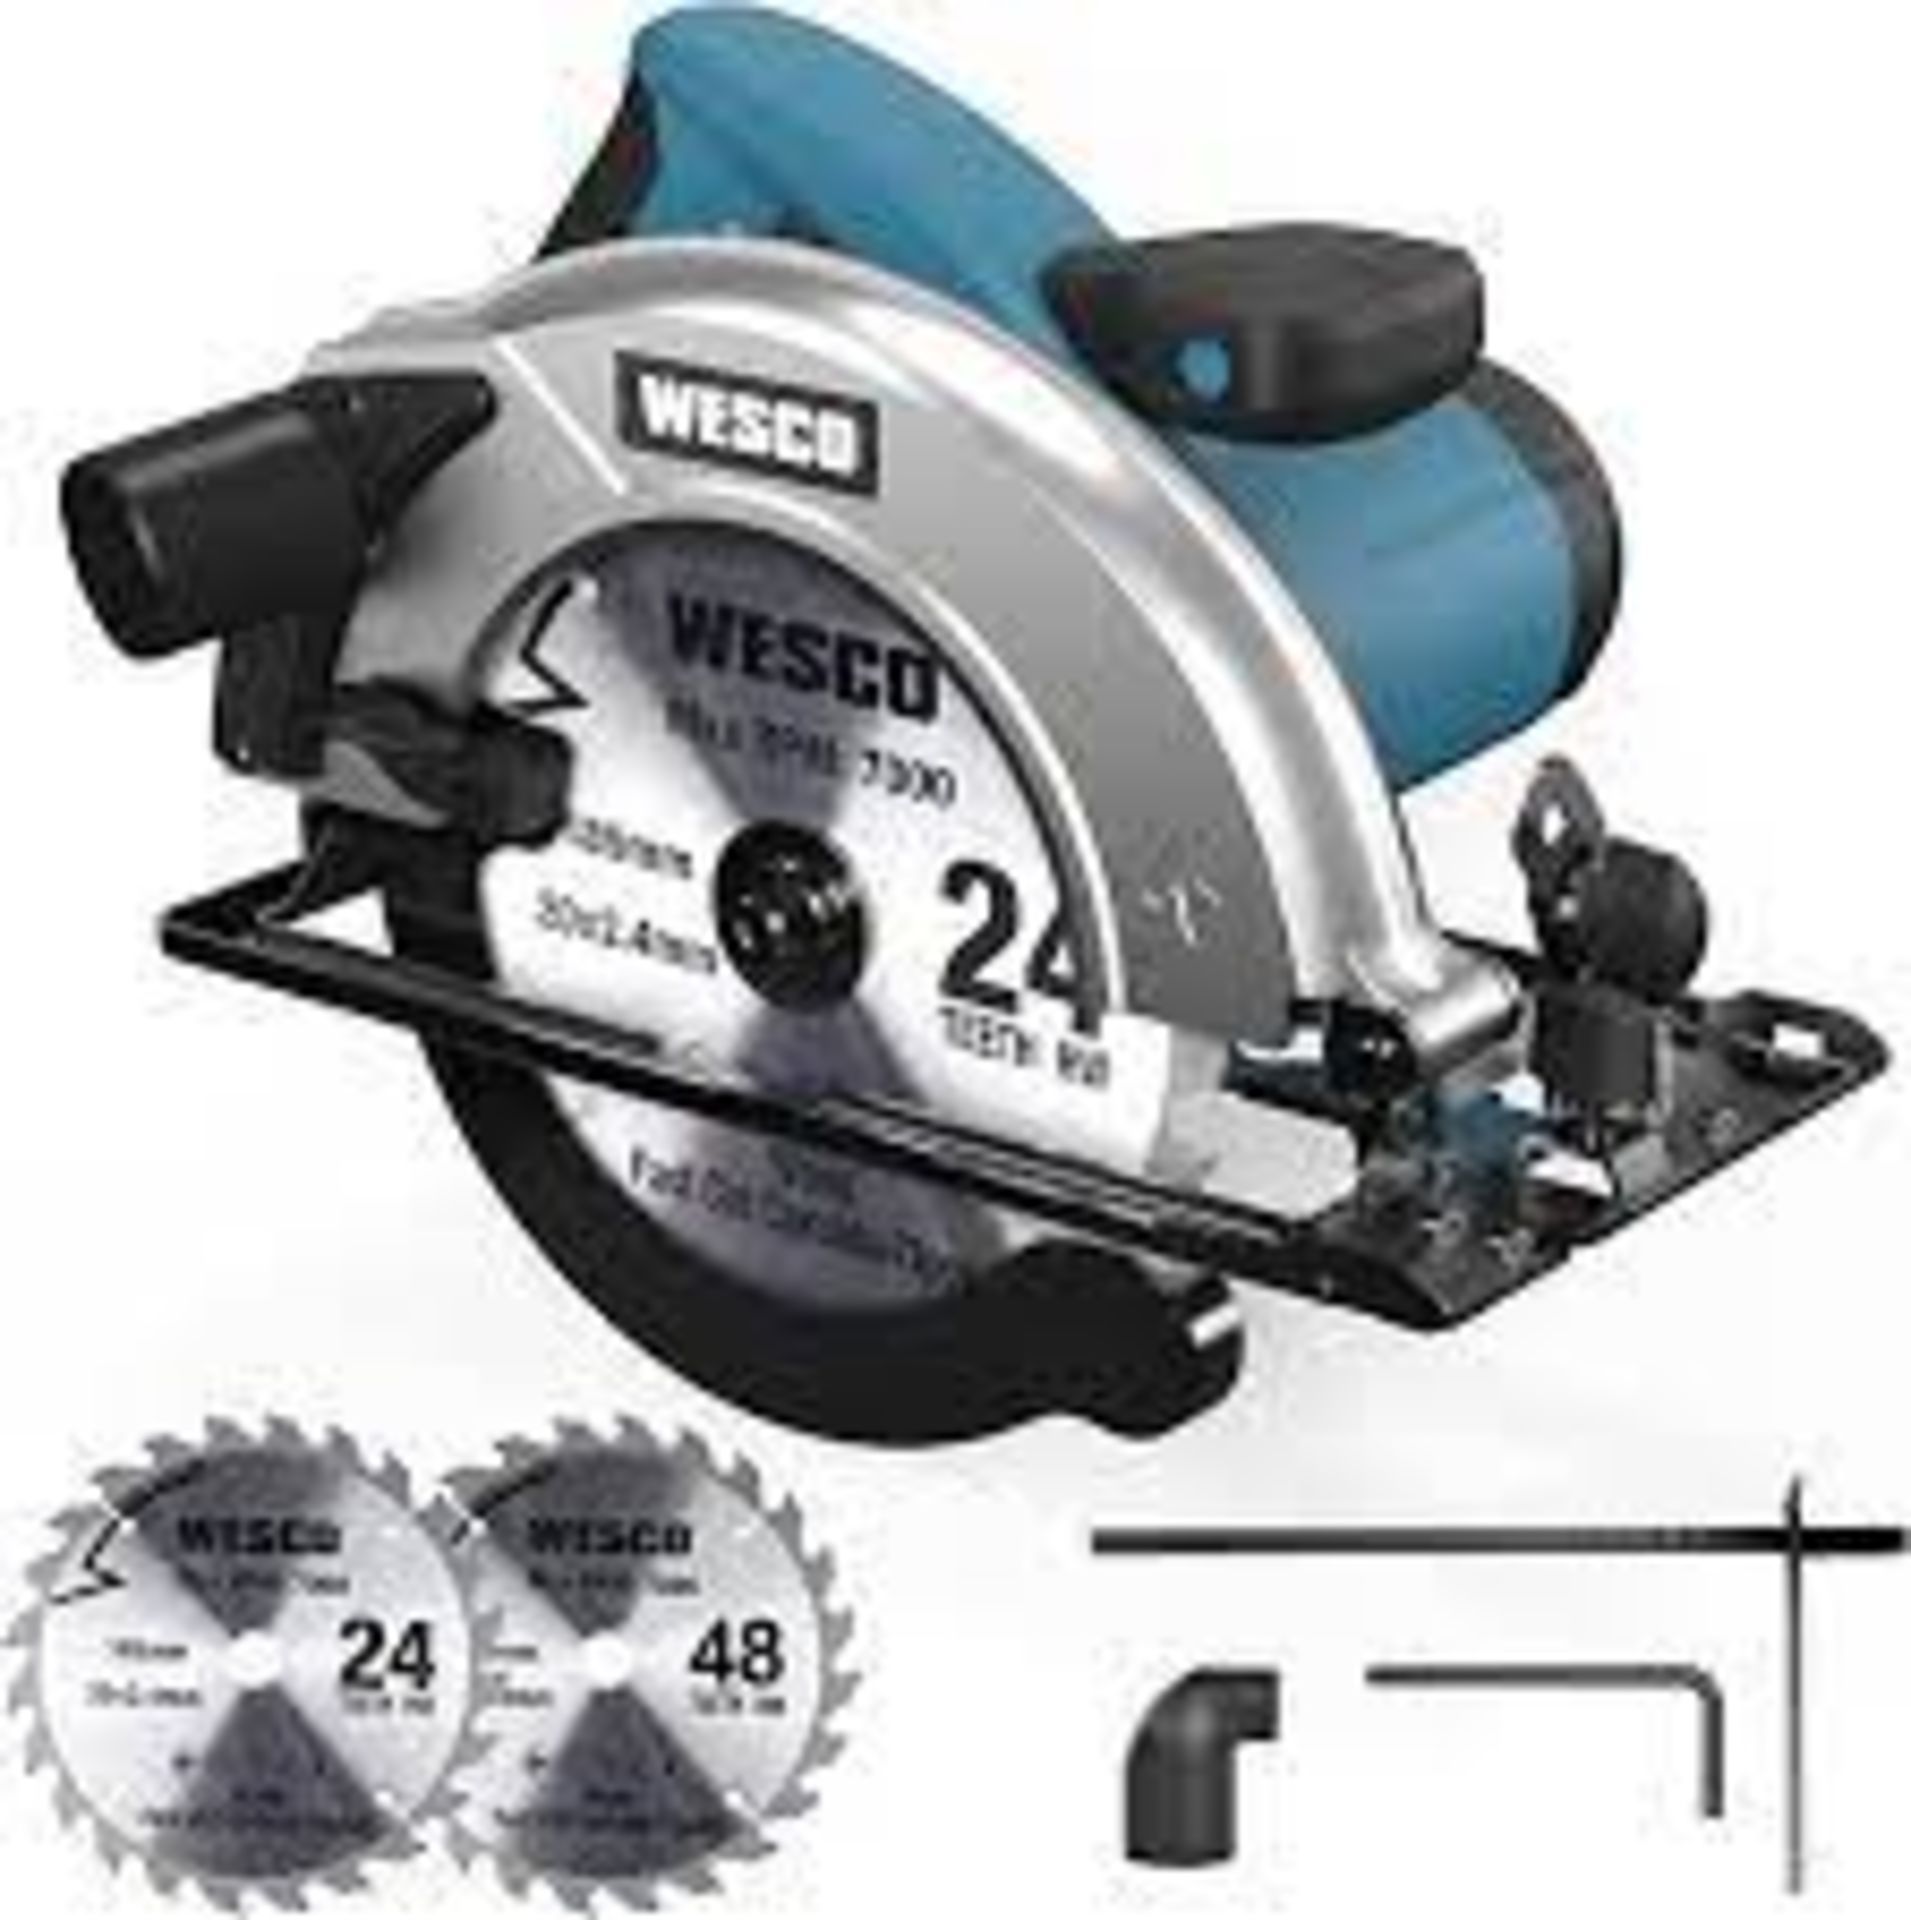 PALLET TO CONTAIN 24 x New & Boxed WESCO Circular Saw 1400W 5800 RPM Skill Saw. Cutting Depth: